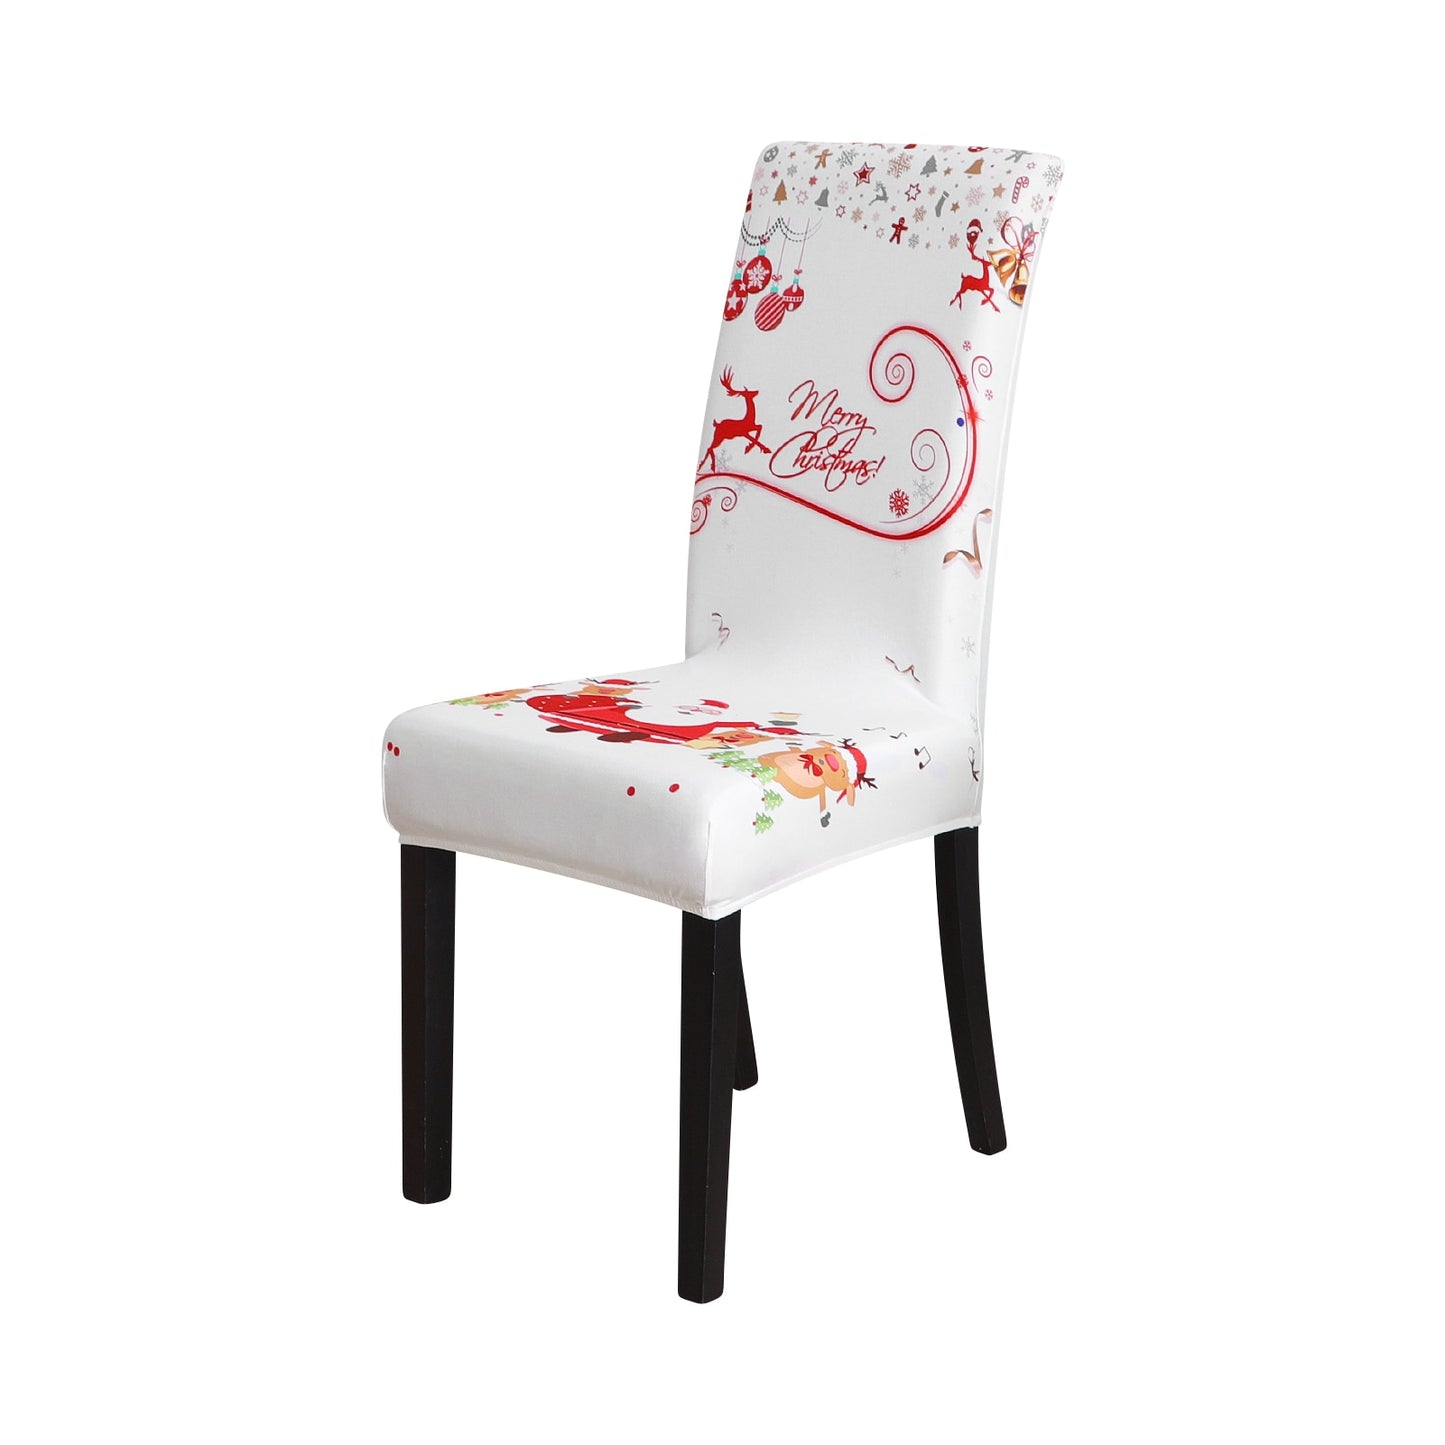 New - chair covers elastic limited Christmas edition